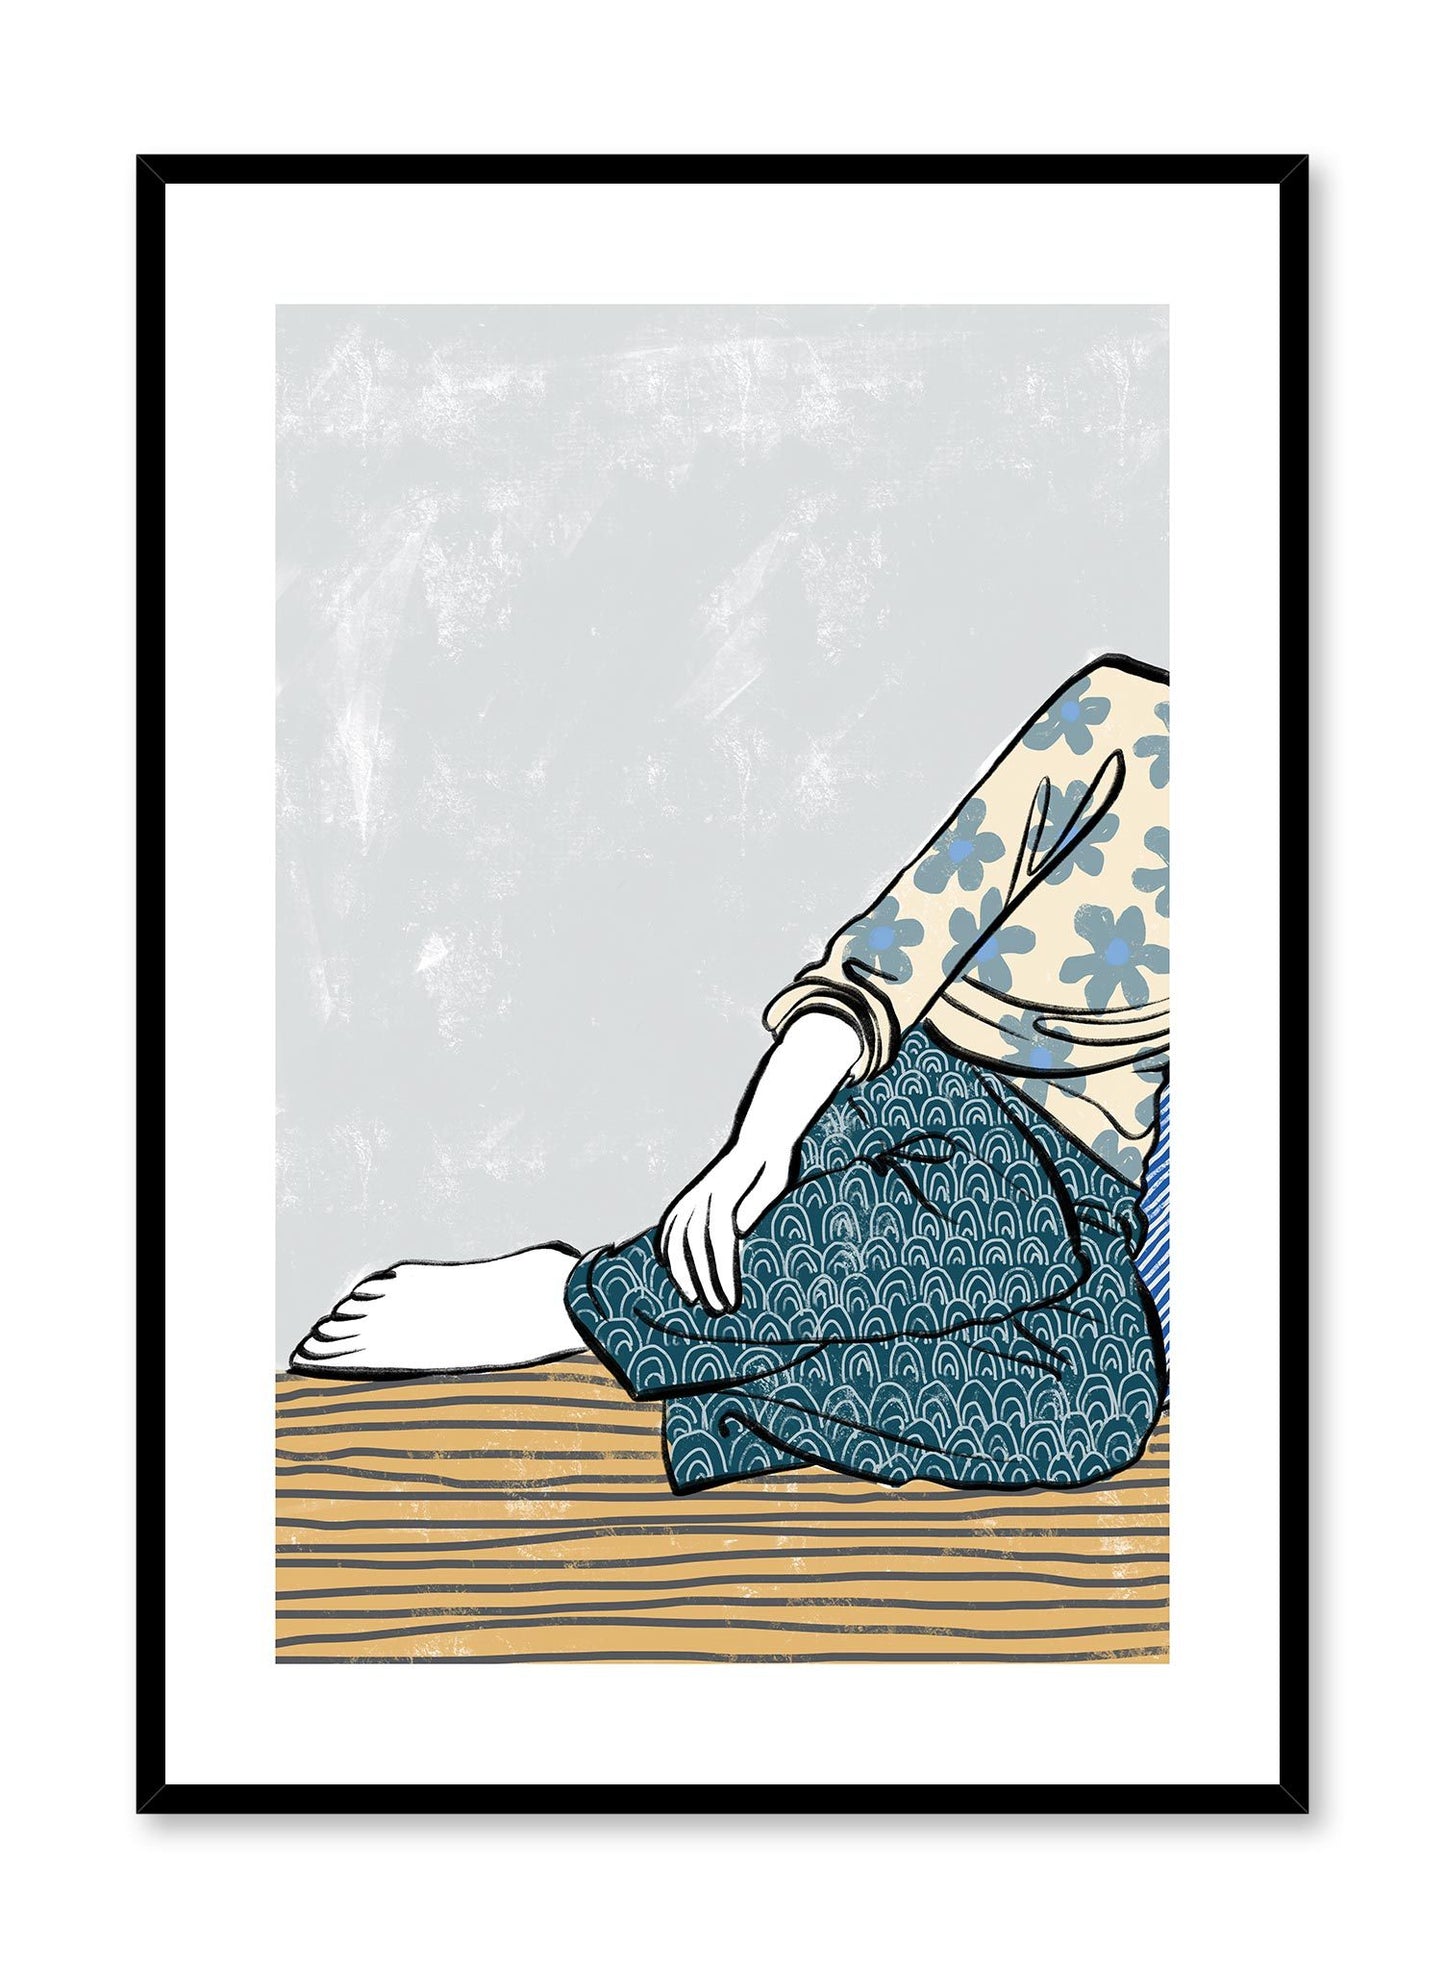 Yukata is a minimalist illustration by Opposite Wall of a woman sitting on the floor wearing comfortable clothing.